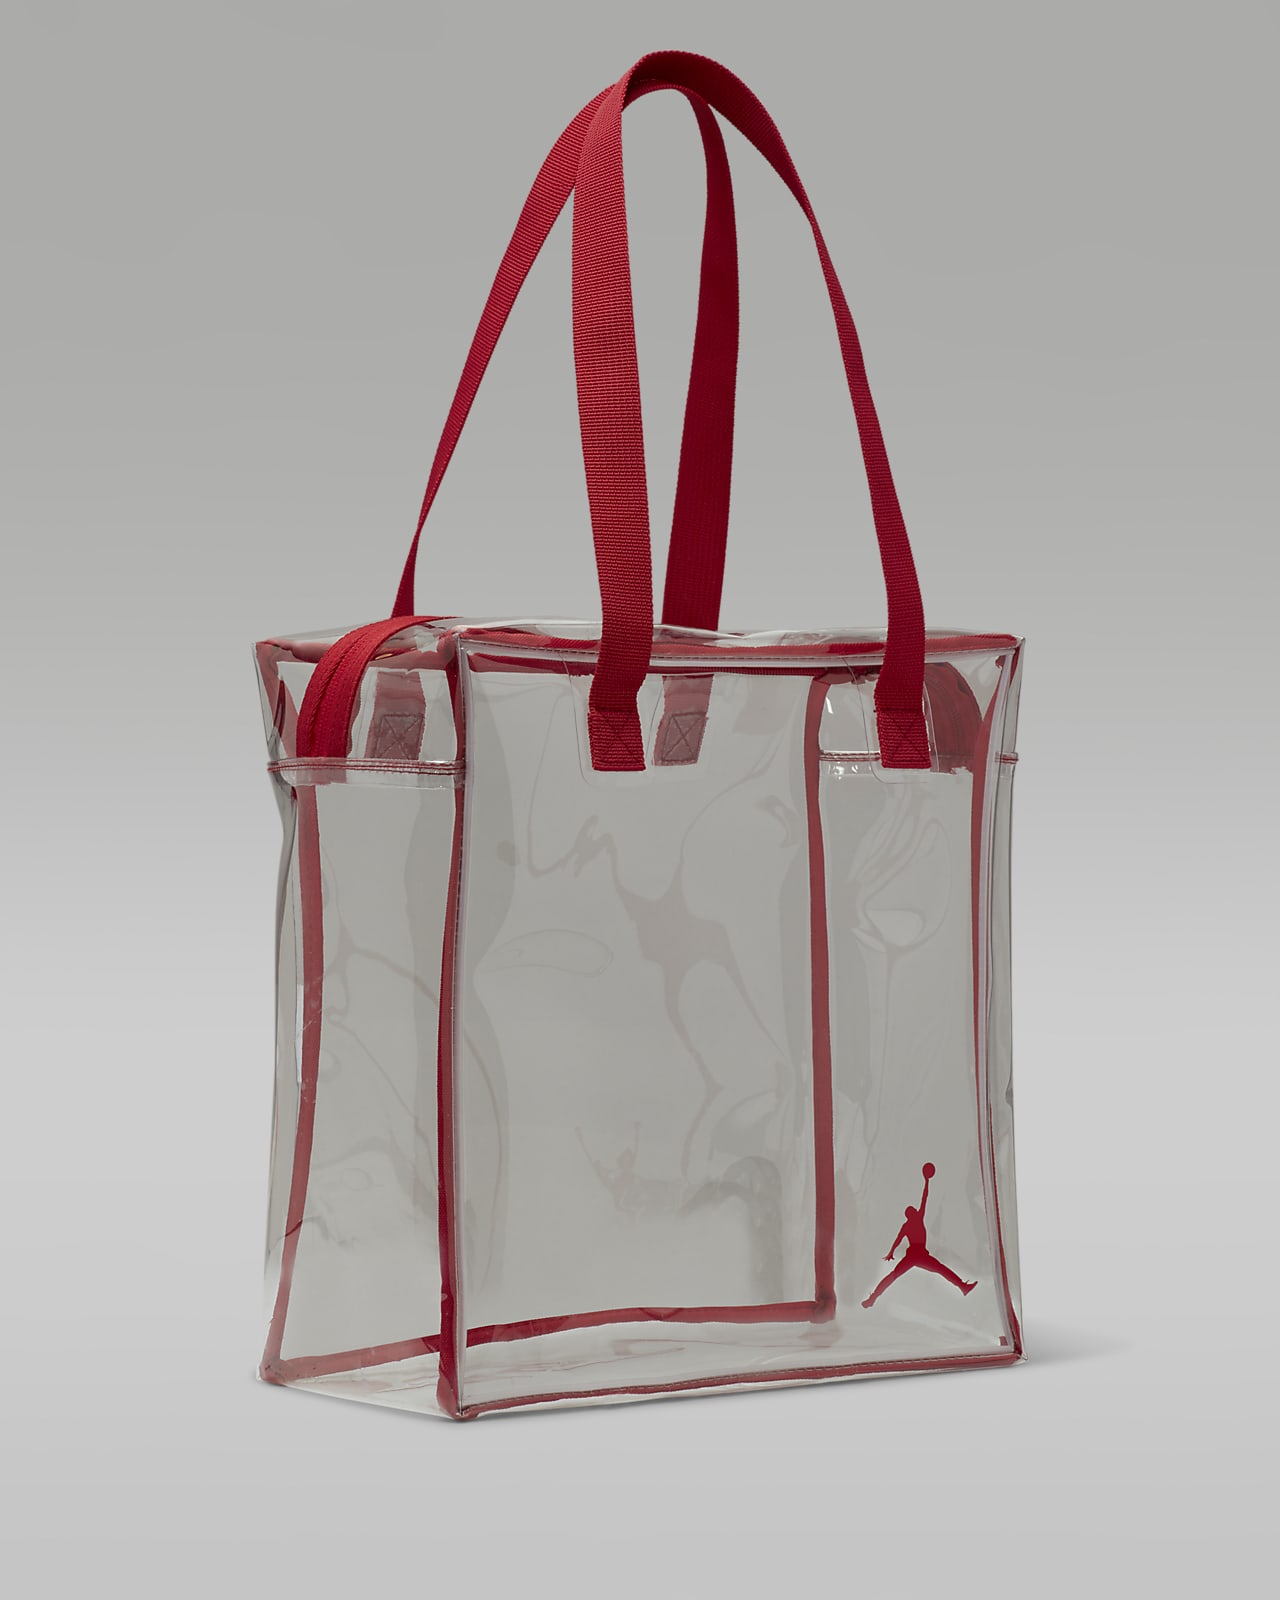 Louis Vuitton LV Shopping Bag Plastic Bag Empty Tote Gift for Sale